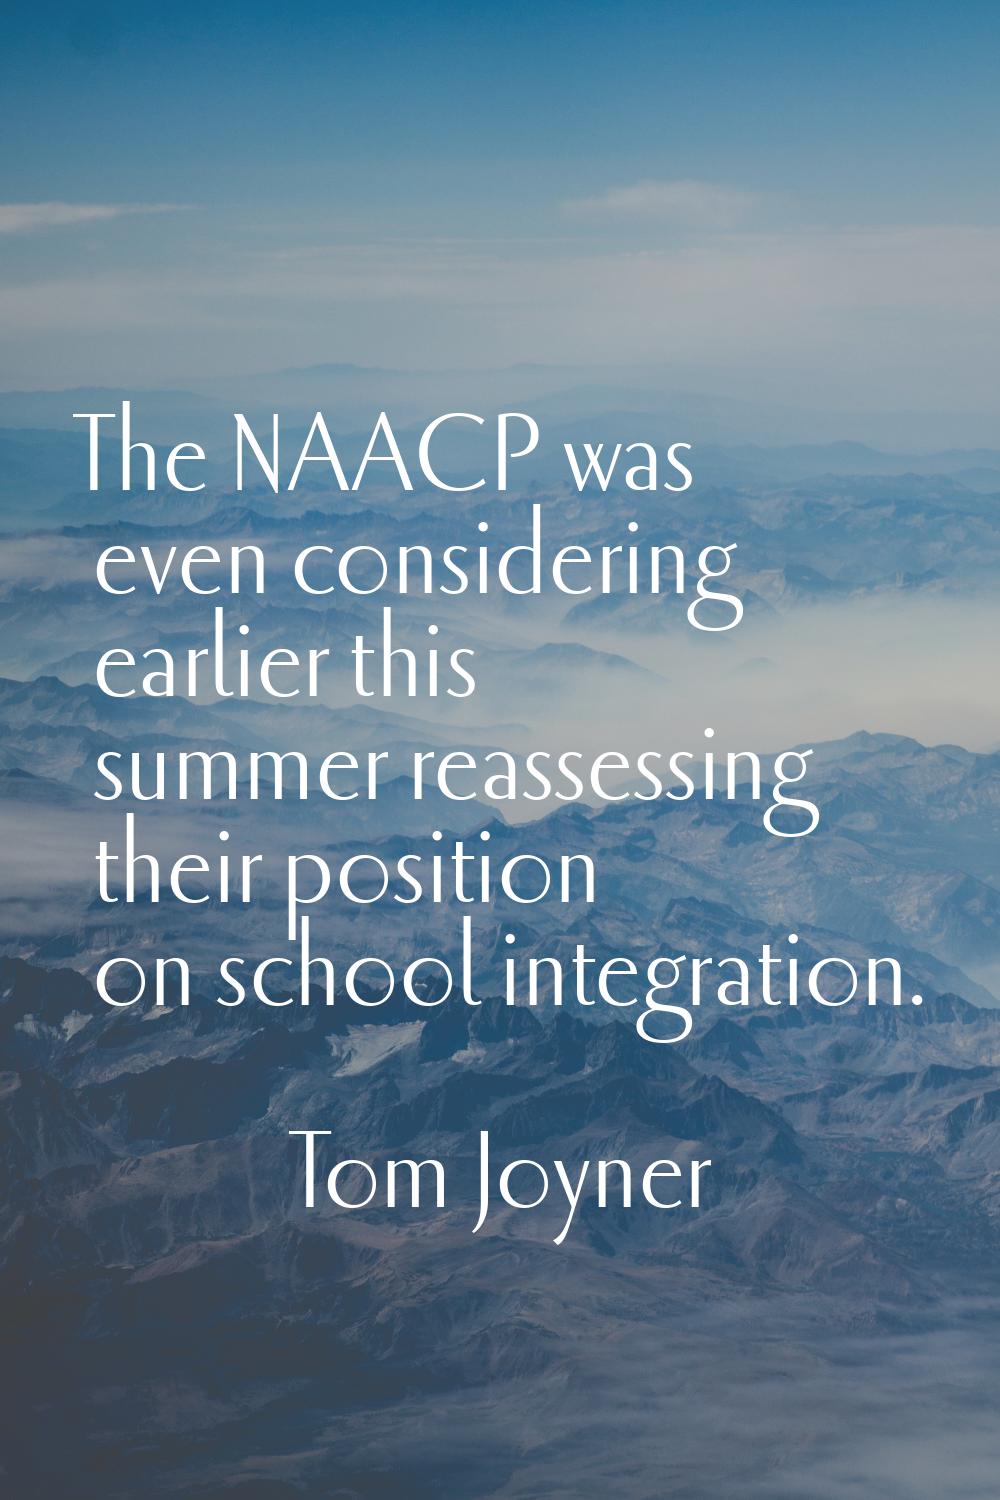 The NAACP was even considering earlier this summer reassessing their position on school integration